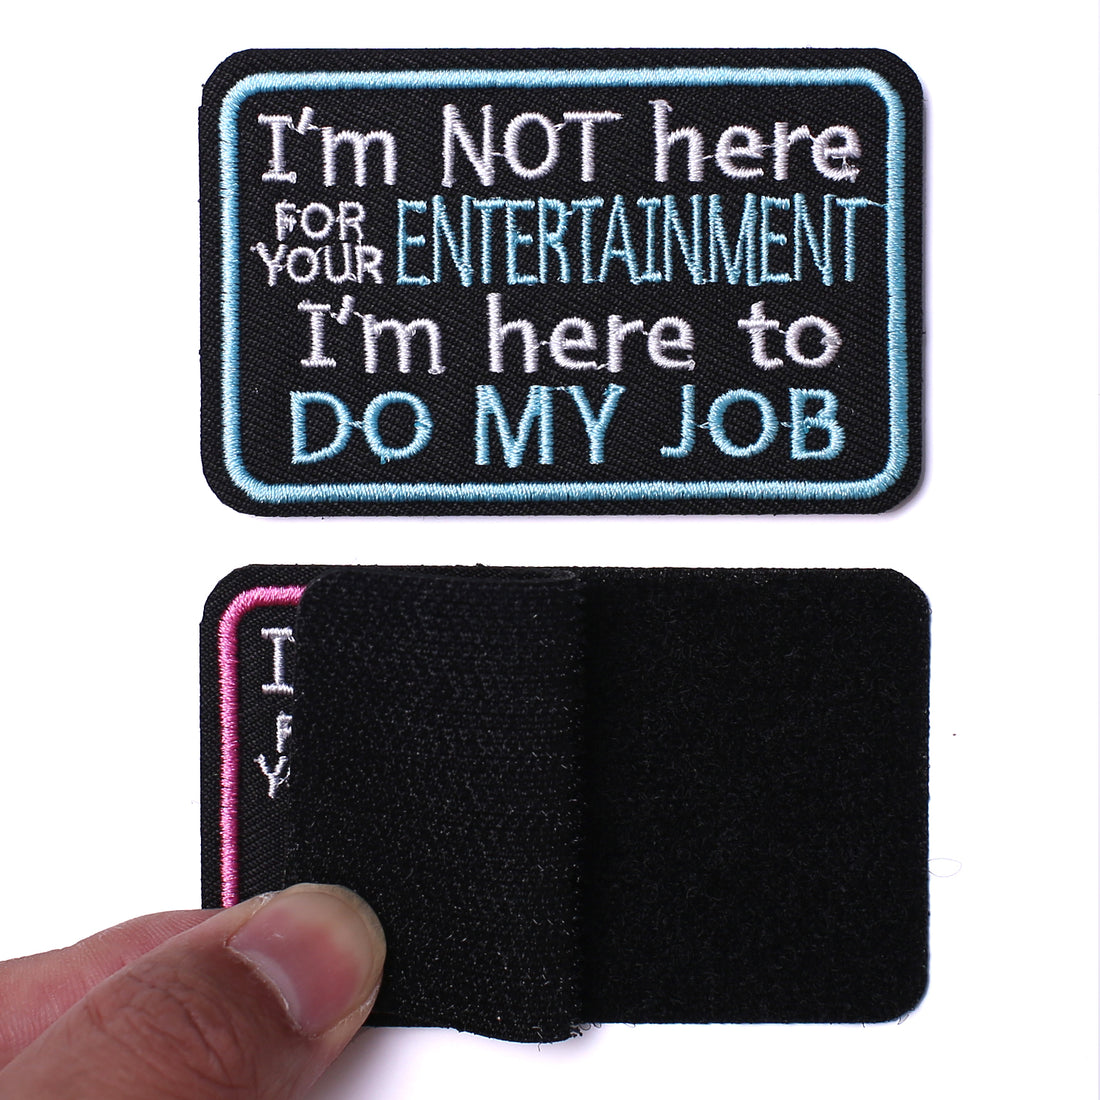 2Pcs Service Dog Patches, Do My Job Not for Your Entertainment, Vests/Harnesses Emblem Embroidered Fastener Hook & Loop Patch